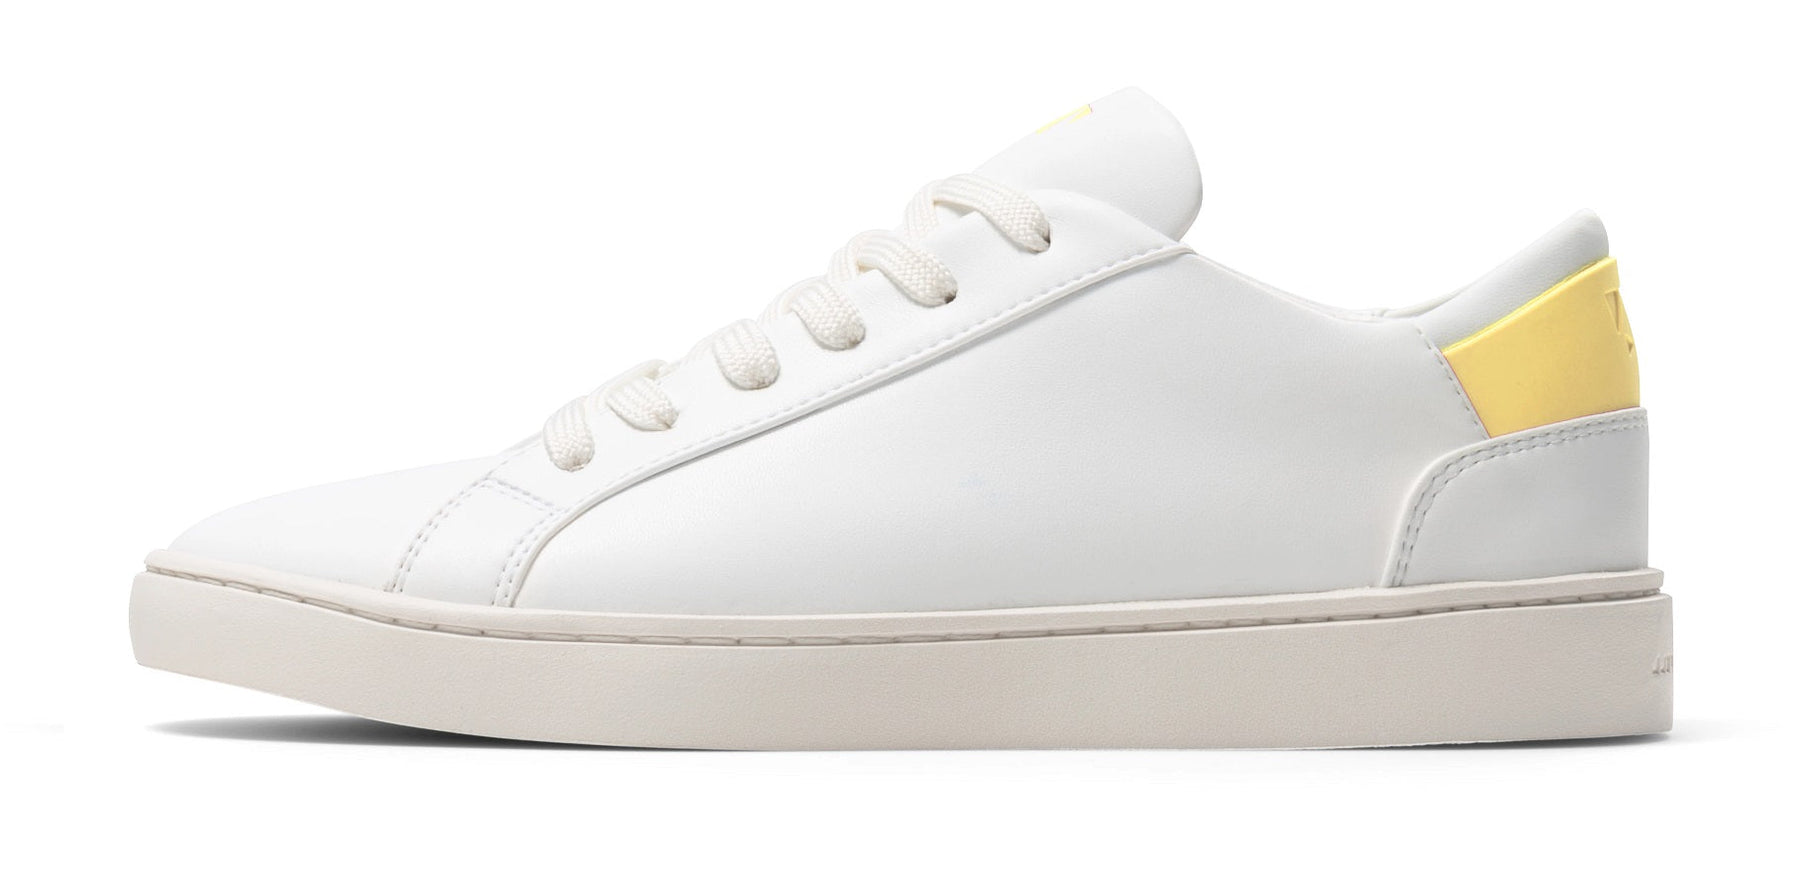 side view of vegan leather sneakers in white with yellow details